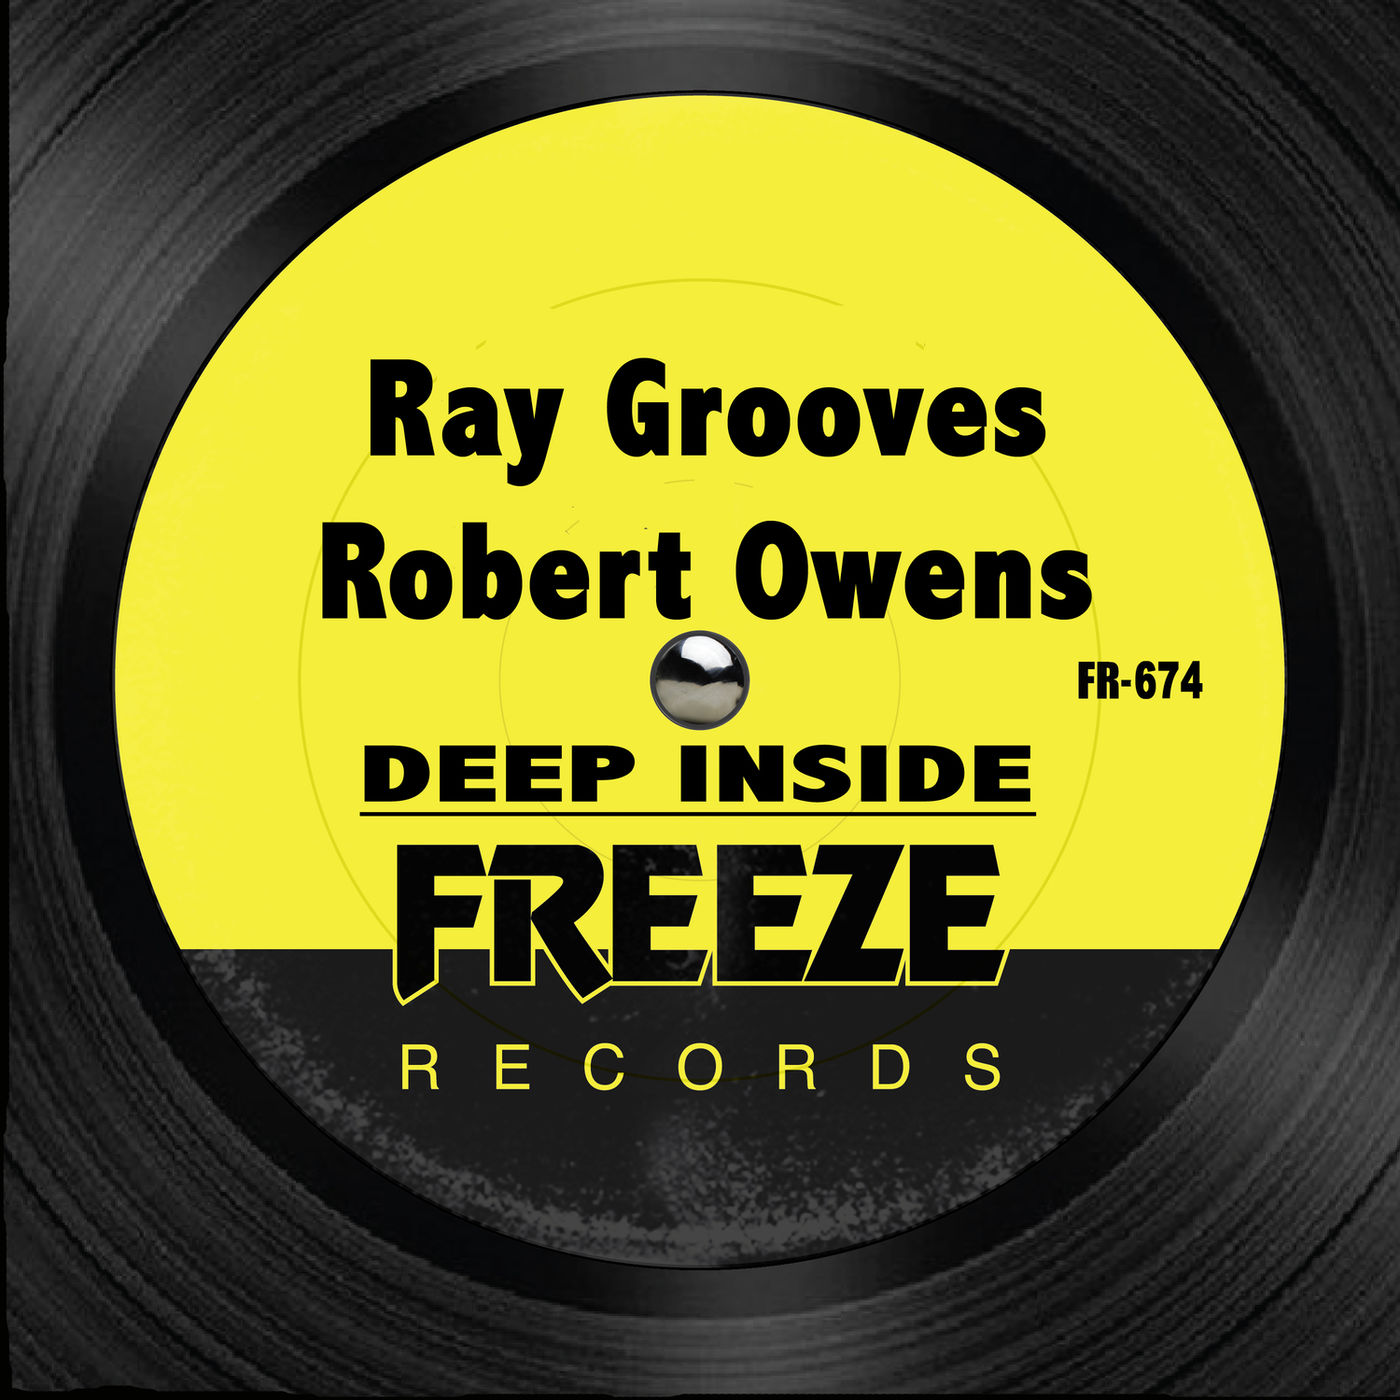 Ray Grooves & Robert Owens - Deep Inside / Freeze Records